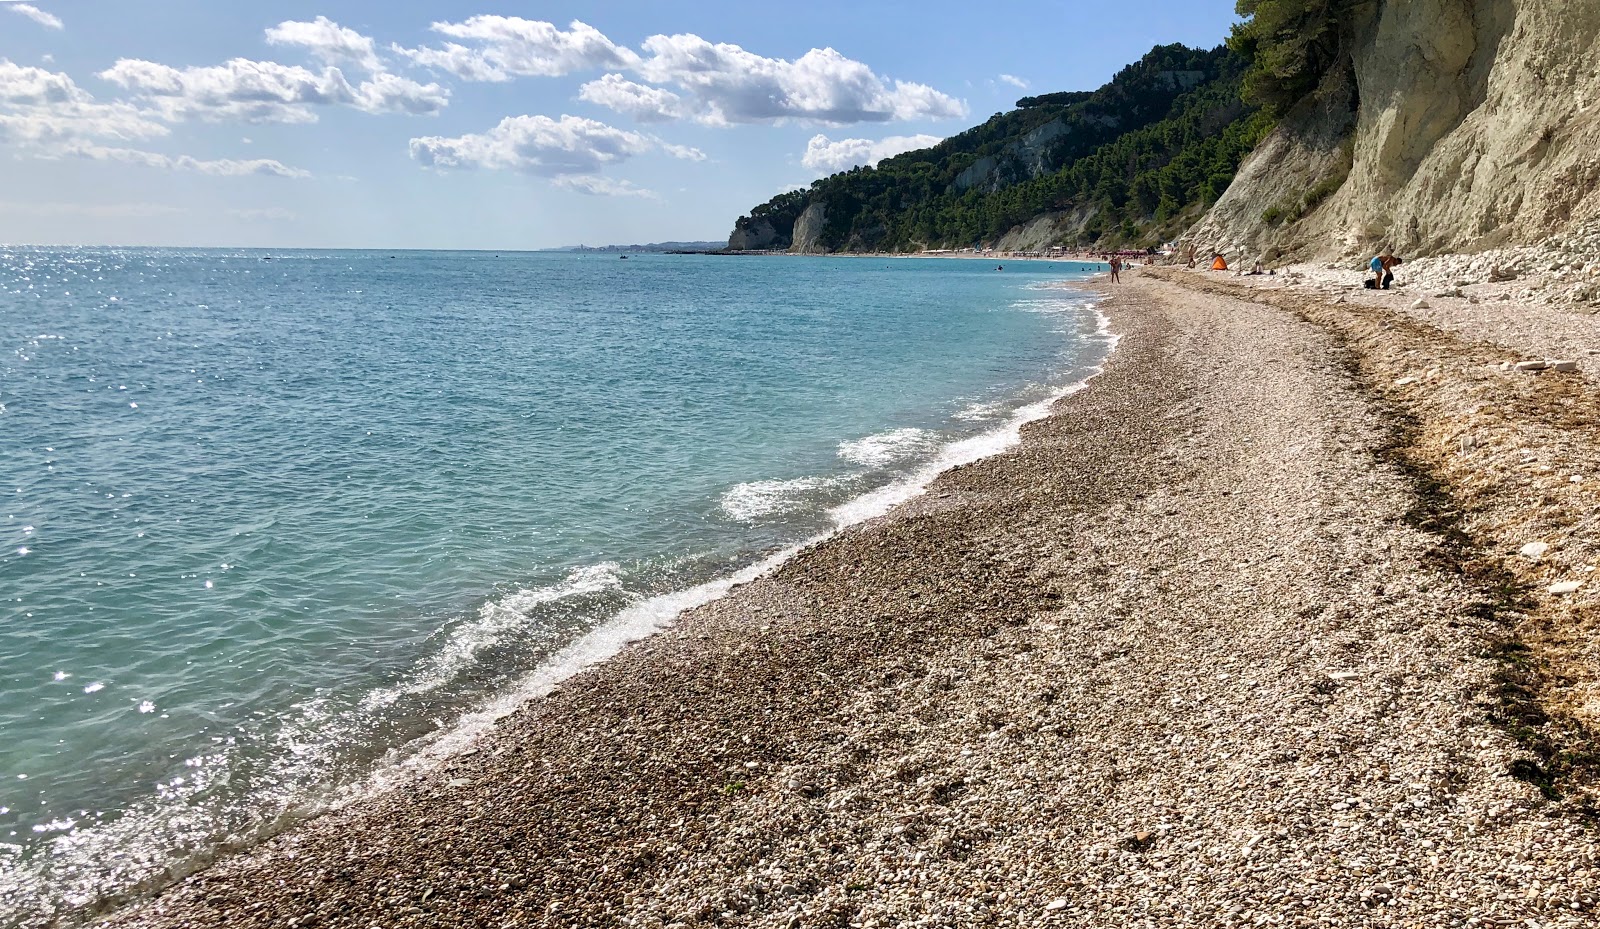 Photo of Spiaggia Sassi Neri with long straight shore